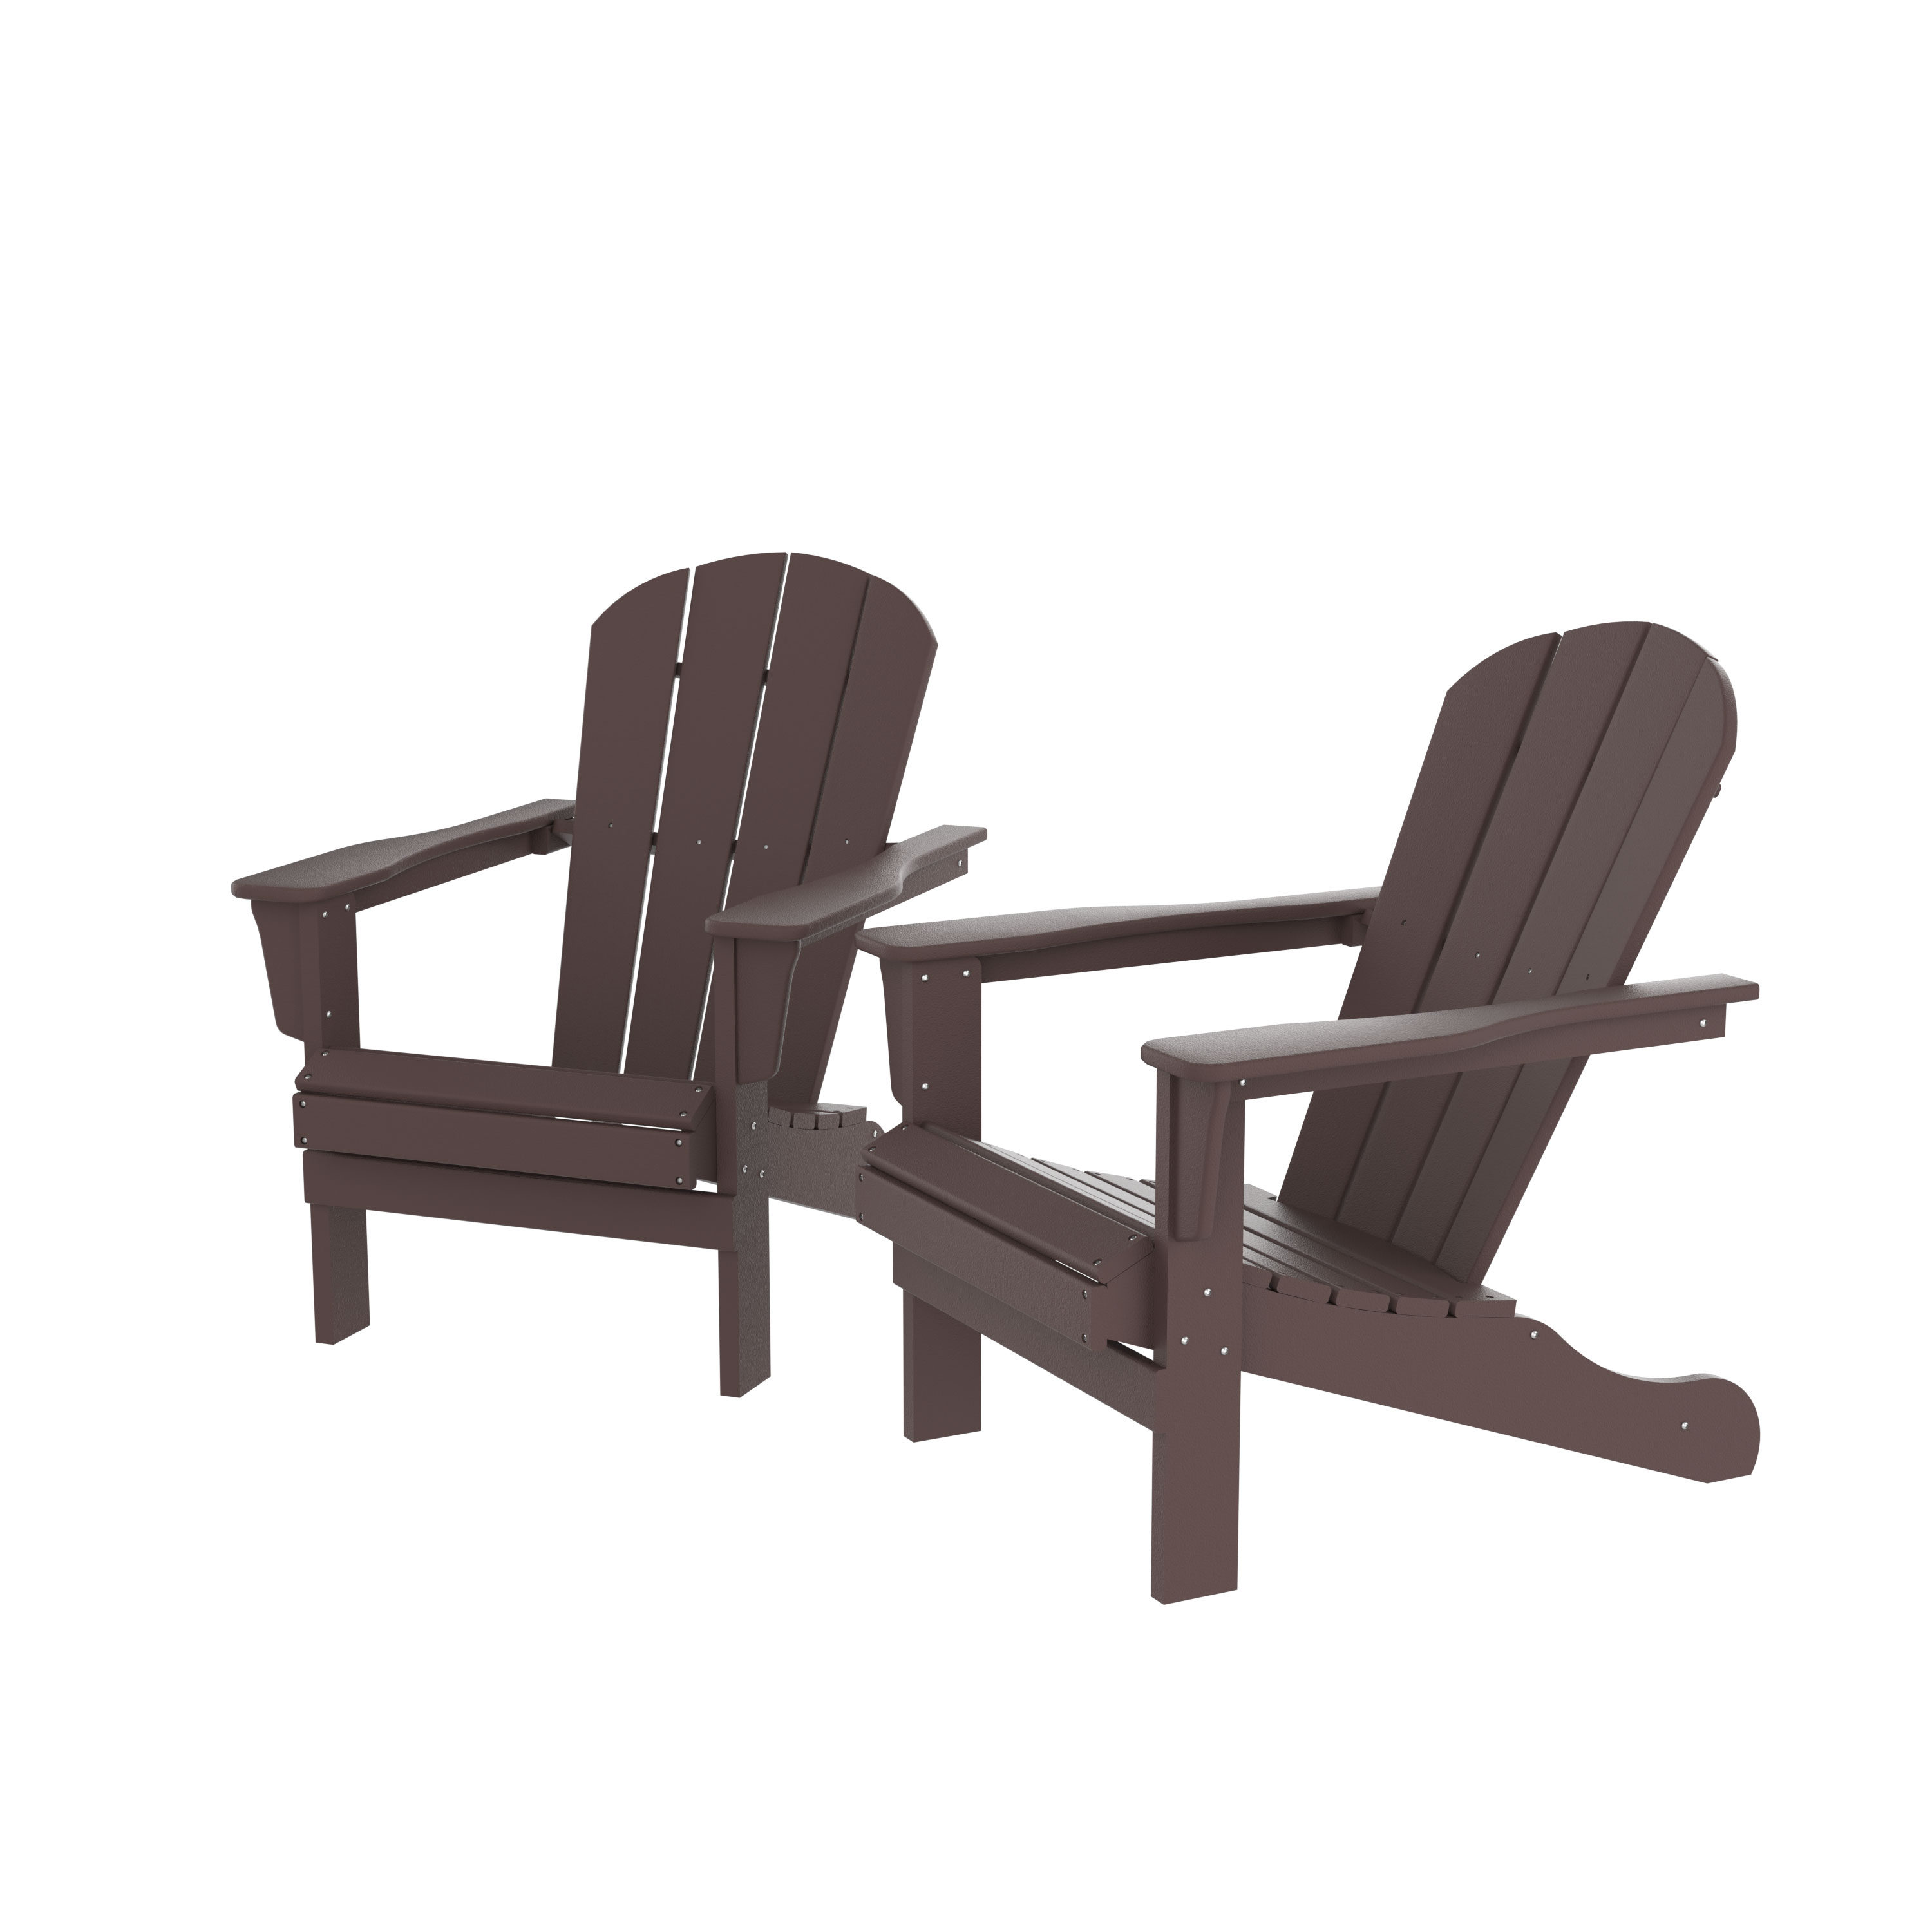 Adirondack Chair, Fire Pit Chairs, Sand Chair, Patio Outdoor Chairs, Dpe Plastic Resin Deck Chair, Lawn Chairs, Adult Size, Weather Resistant For Patio/ Backyard/Garden, Brown, Set Of 2 - image 5 of 6